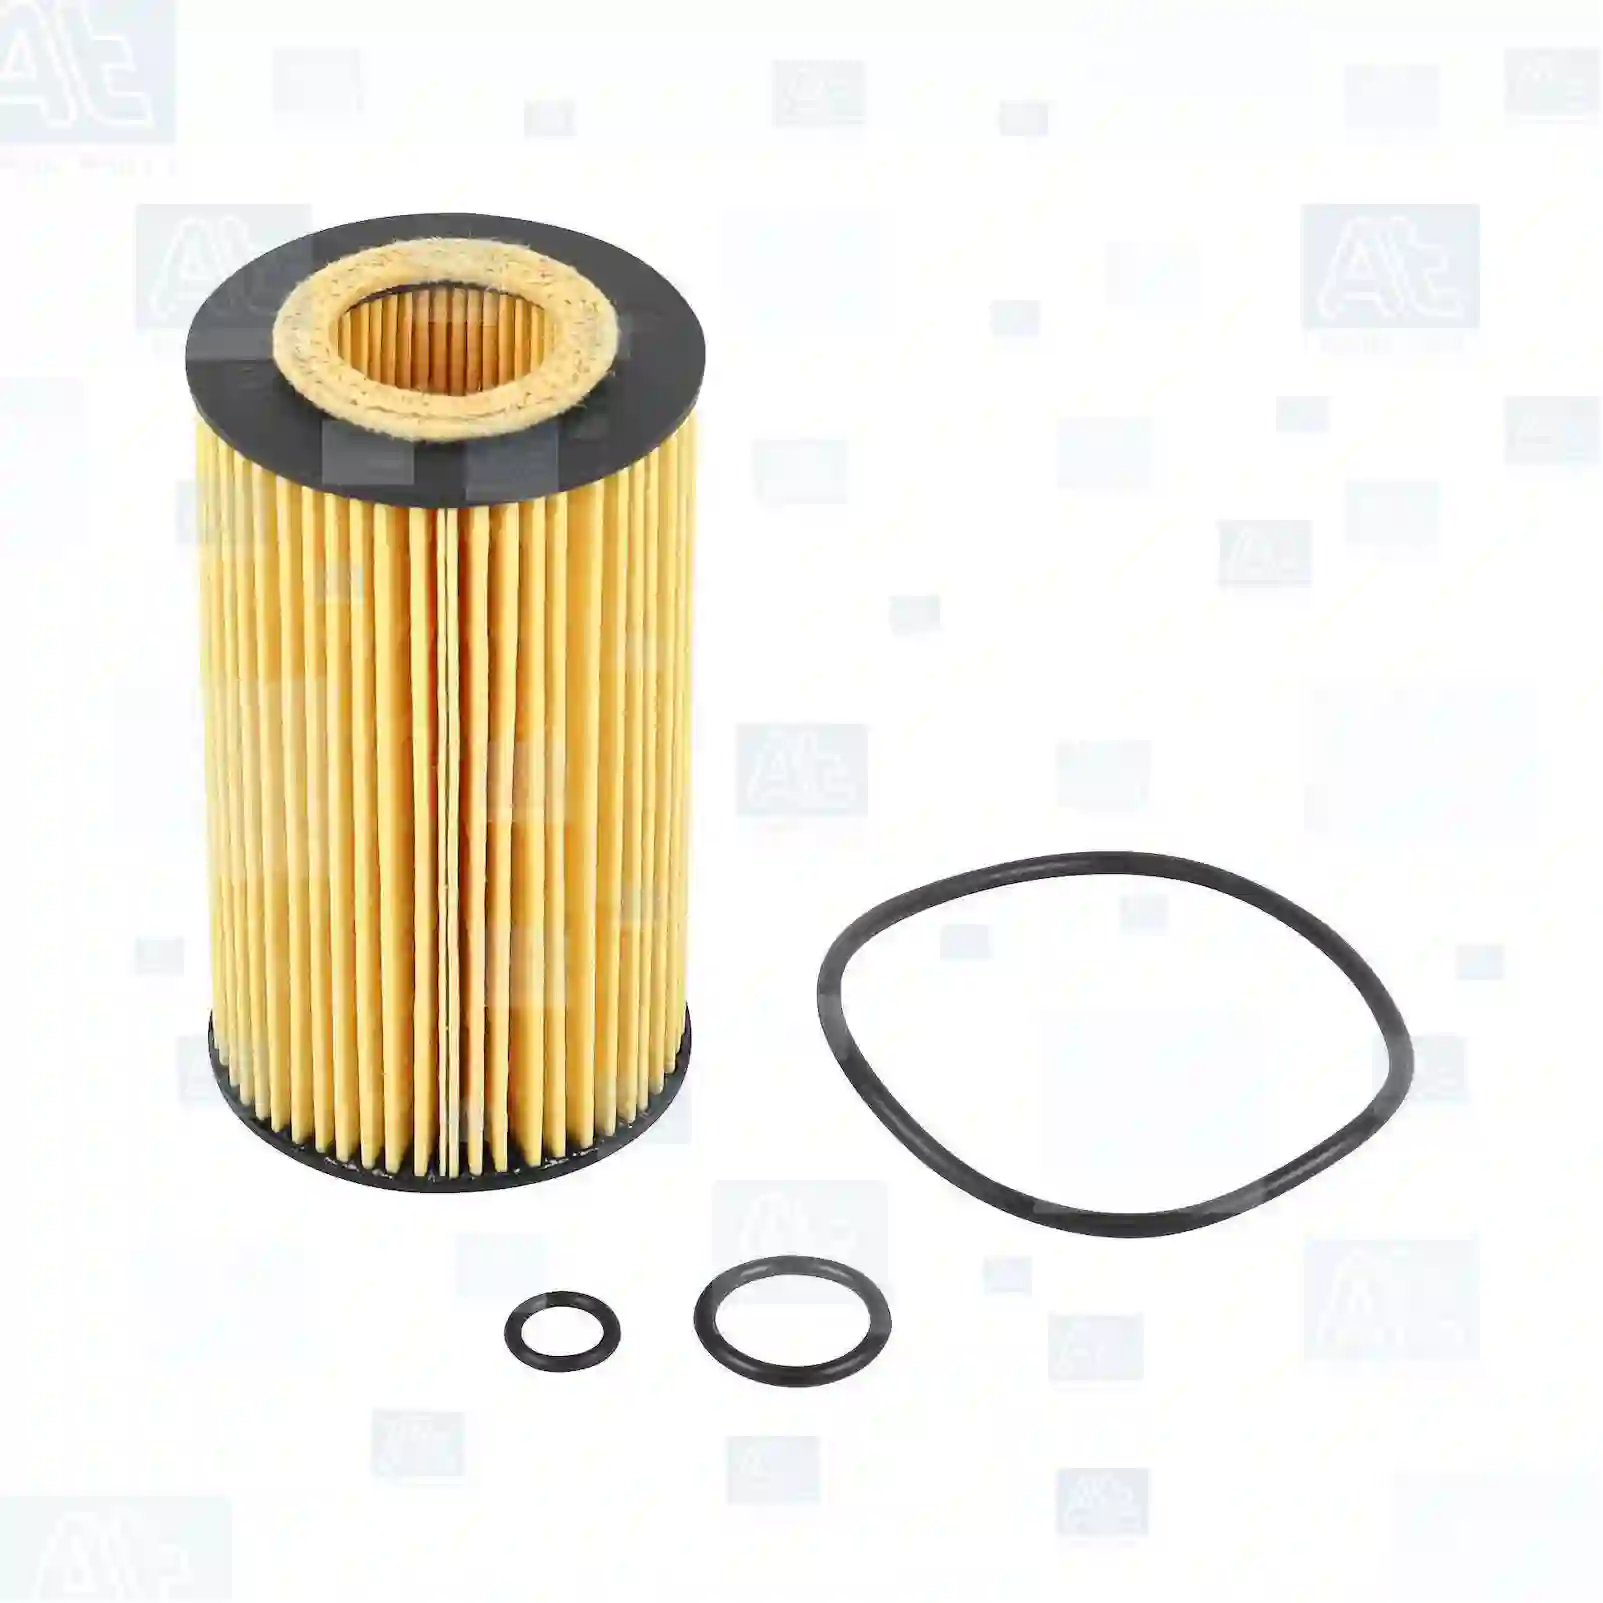 Oil filter insert, 77702050, X625, 5080244AB, 5086301AA, 5102904AA, 5102905AA, 5102905AB, 51022905AA, 5143064AA, 5179103AA, 5183748AA, 71775180, K05102904AA, K05102905AA, K05102905AB, K05143064AA, 5086301AA, 5102905AB, 42540021A, 5086301AA, 5102905AB, 0001802209, 0001802309, 0001802609, 0001803009, 0001803109, 0001803309, 1121800009, 112180000967, 1121840025, 1121840125, 1121840225, 1121840325, 1121840525, 6111800009, 611180000967, 6111800010, 6111800110, 6111800210, 6641800009, 1121800009 ||  77702050 At Spare Part | Engine, Accelerator Pedal, Camshaft, Connecting Rod, Crankcase, Crankshaft, Cylinder Head, Engine Suspension Mountings, Exhaust Manifold, Exhaust Gas Recirculation, Filter Kits, Flywheel Housing, General Overhaul Kits, Engine, Intake Manifold, Oil Cleaner, Oil Cooler, Oil Filter, Oil Pump, Oil Sump, Piston & Liner, Sensor & Switch, Timing Case, Turbocharger, Cooling System, Belt Tensioner, Coolant Filter, Coolant Pipe, Corrosion Prevention Agent, Drive, Expansion Tank, Fan, Intercooler, Monitors & Gauges, Radiator, Thermostat, V-Belt / Timing belt, Water Pump, Fuel System, Electronical Injector Unit, Feed Pump, Fuel Filter, cpl., Fuel Gauge Sender,  Fuel Line, Fuel Pump, Fuel Tank, Injection Line Kit, Injection Pump, Exhaust System, Clutch & Pedal, Gearbox, Propeller Shaft, Axles, Brake System, Hubs & Wheels, Suspension, Leaf Spring, Universal Parts / Accessories, Steering, Electrical System, Cabin Oil filter insert, 77702050, X625, 5080244AB, 5086301AA, 5102904AA, 5102905AA, 5102905AB, 51022905AA, 5143064AA, 5179103AA, 5183748AA, 71775180, K05102904AA, K05102905AA, K05102905AB, K05143064AA, 5086301AA, 5102905AB, 42540021A, 5086301AA, 5102905AB, 0001802209, 0001802309, 0001802609, 0001803009, 0001803109, 0001803309, 1121800009, 112180000967, 1121840025, 1121840125, 1121840225, 1121840325, 1121840525, 6111800009, 611180000967, 6111800010, 6111800110, 6111800210, 6641800009, 1121800009 ||  77702050 At Spare Part | Engine, Accelerator Pedal, Camshaft, Connecting Rod, Crankcase, Crankshaft, Cylinder Head, Engine Suspension Mountings, Exhaust Manifold, Exhaust Gas Recirculation, Filter Kits, Flywheel Housing, General Overhaul Kits, Engine, Intake Manifold, Oil Cleaner, Oil Cooler, Oil Filter, Oil Pump, Oil Sump, Piston & Liner, Sensor & Switch, Timing Case, Turbocharger, Cooling System, Belt Tensioner, Coolant Filter, Coolant Pipe, Corrosion Prevention Agent, Drive, Expansion Tank, Fan, Intercooler, Monitors & Gauges, Radiator, Thermostat, V-Belt / Timing belt, Water Pump, Fuel System, Electronical Injector Unit, Feed Pump, Fuel Filter, cpl., Fuel Gauge Sender,  Fuel Line, Fuel Pump, Fuel Tank, Injection Line Kit, Injection Pump, Exhaust System, Clutch & Pedal, Gearbox, Propeller Shaft, Axles, Brake System, Hubs & Wheels, Suspension, Leaf Spring, Universal Parts / Accessories, Steering, Electrical System, Cabin